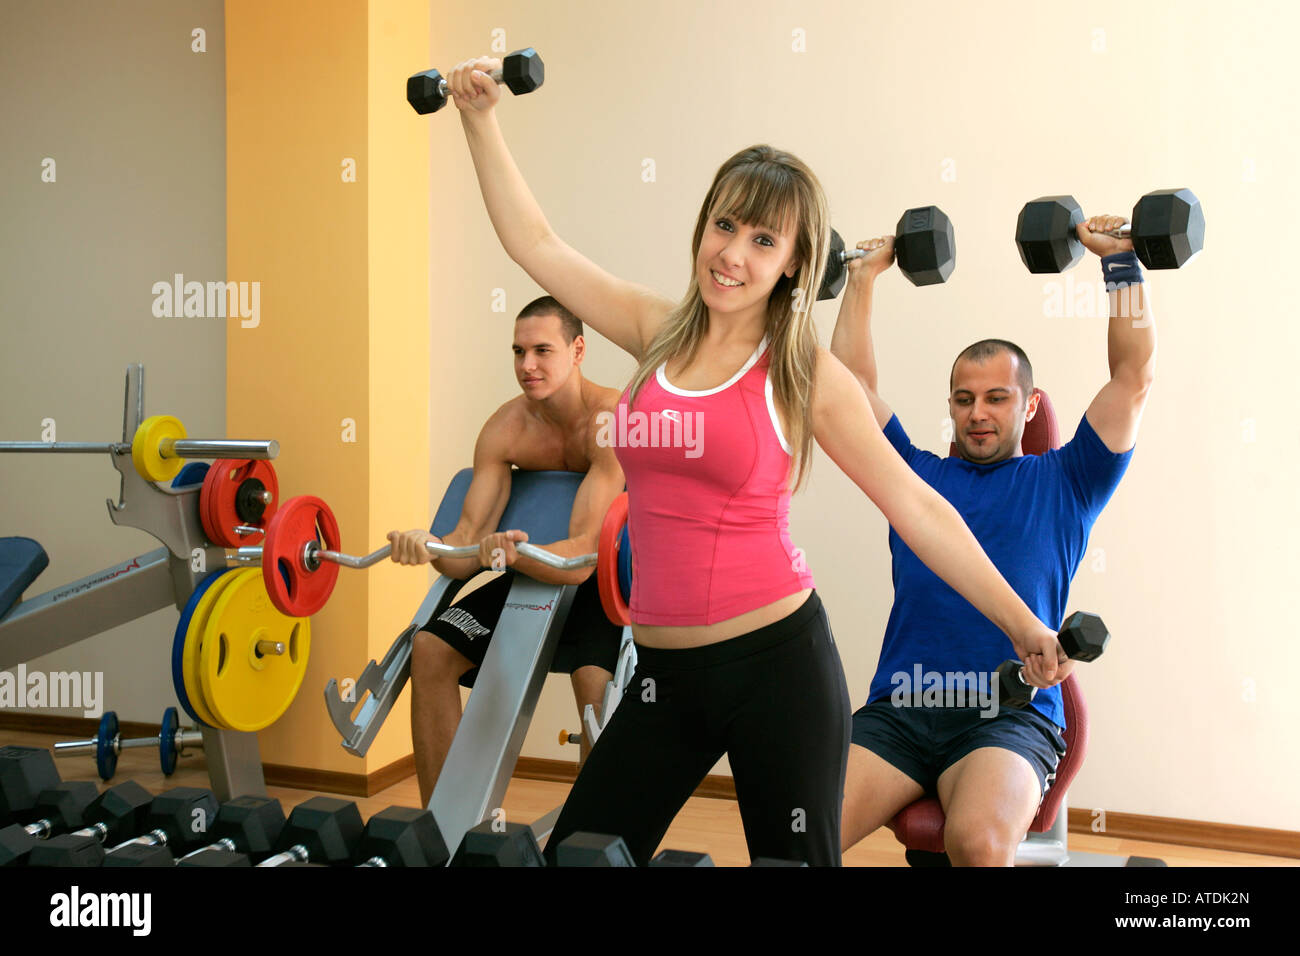 Fitness club gym healthy sport muscles training Stock Photo